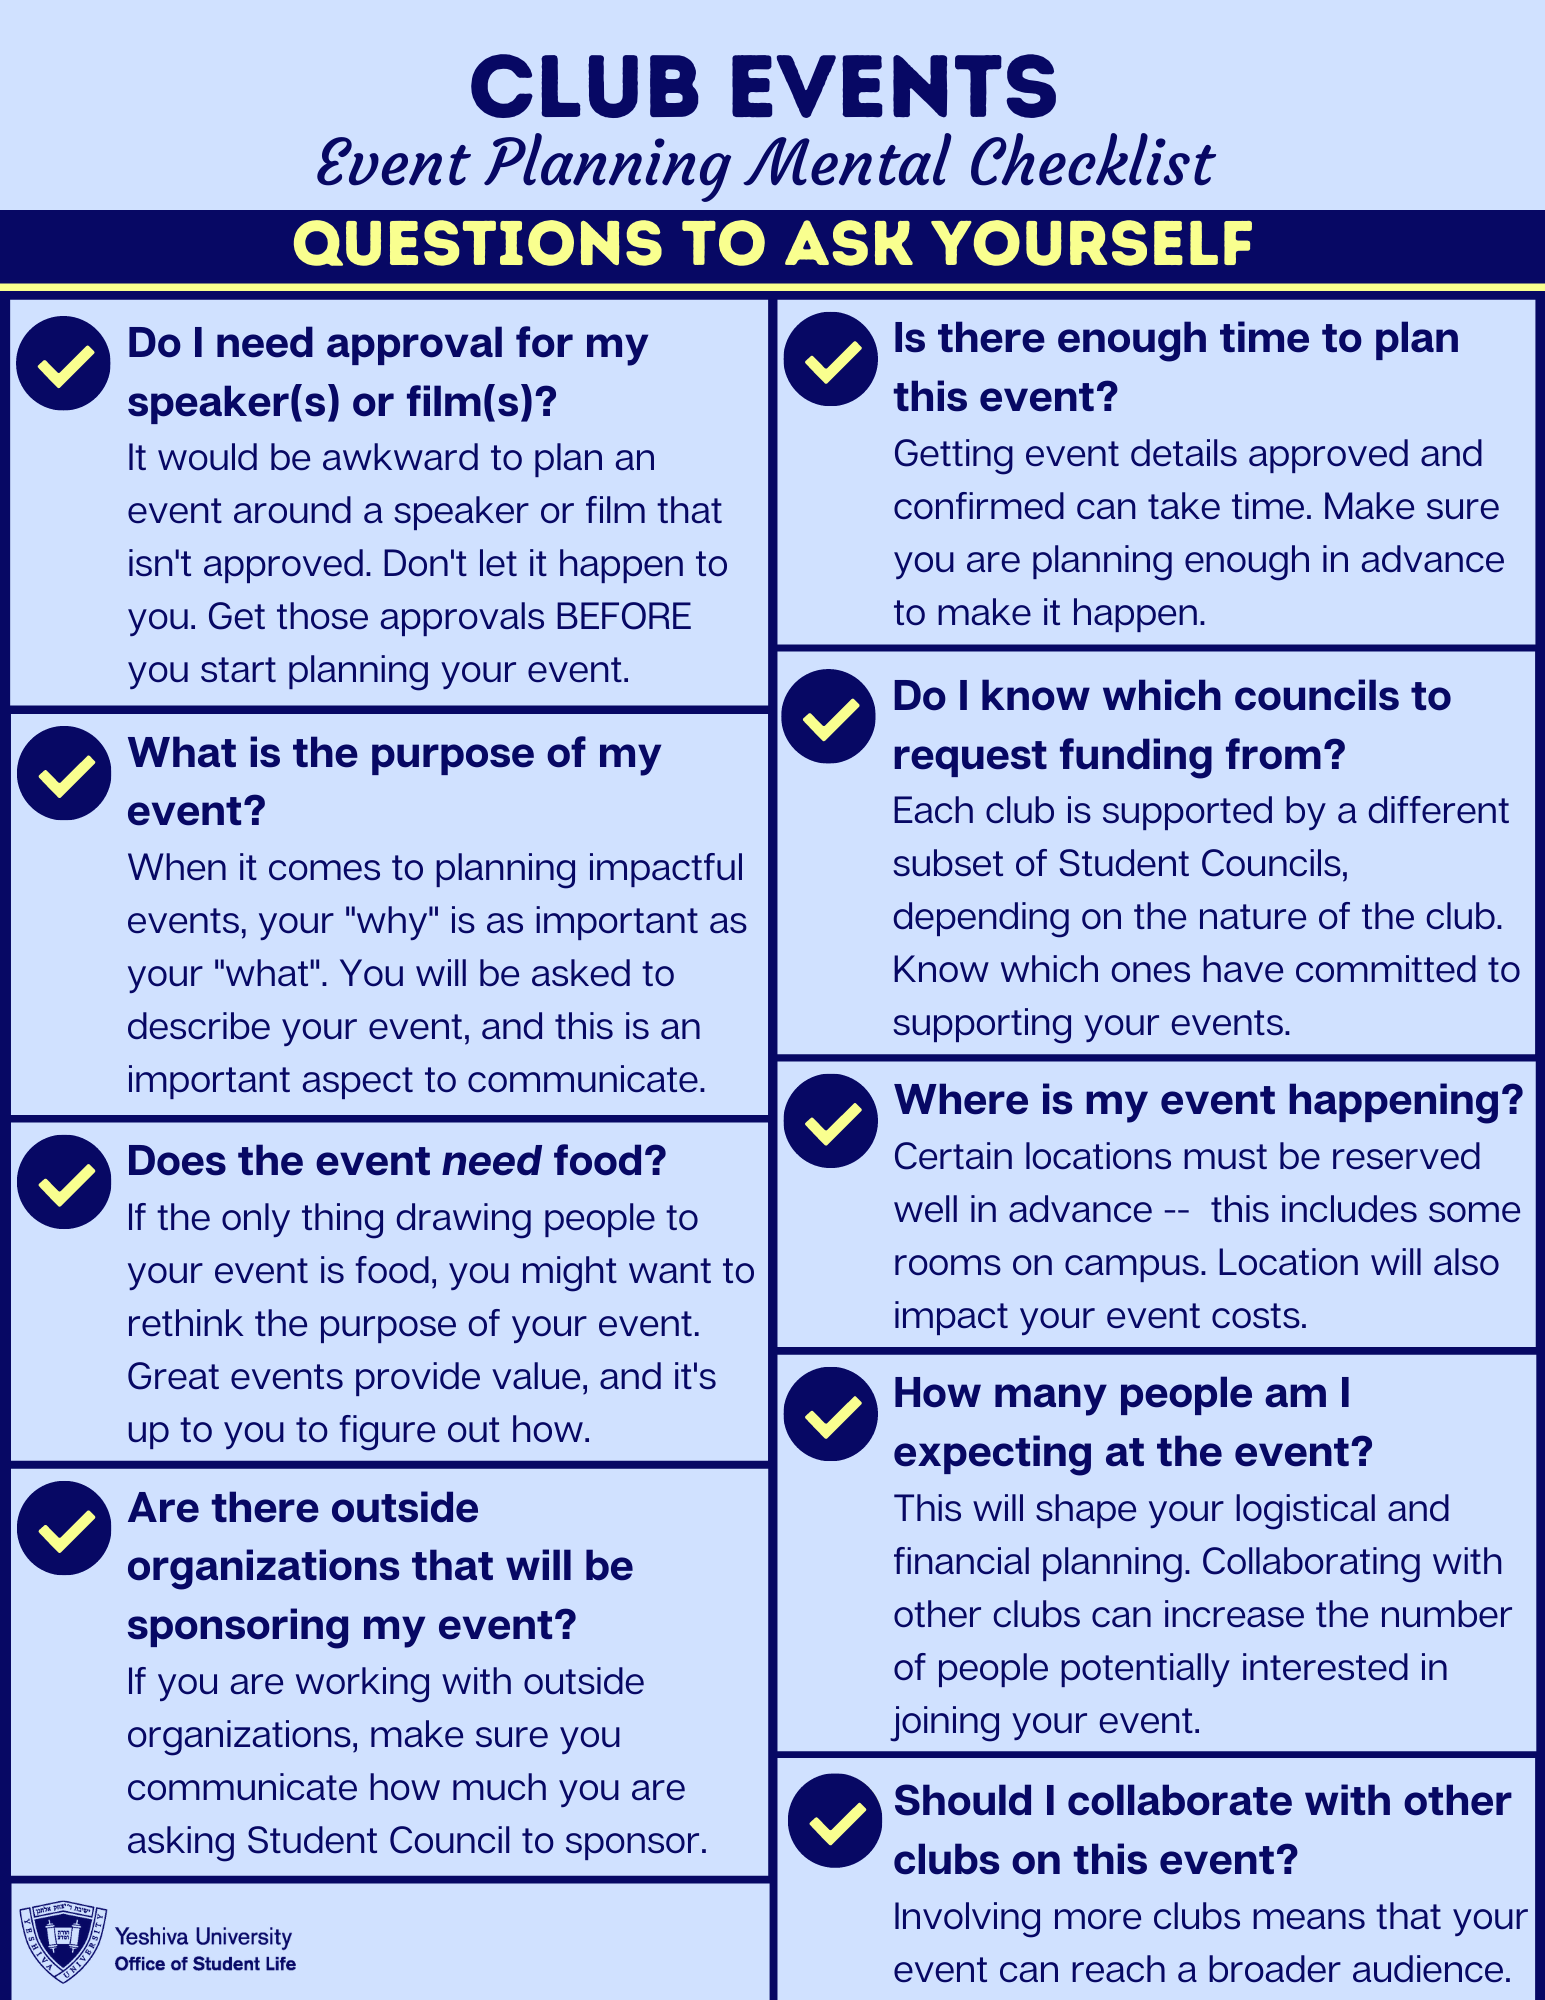 Questions to Ask Yourself While Planning Events